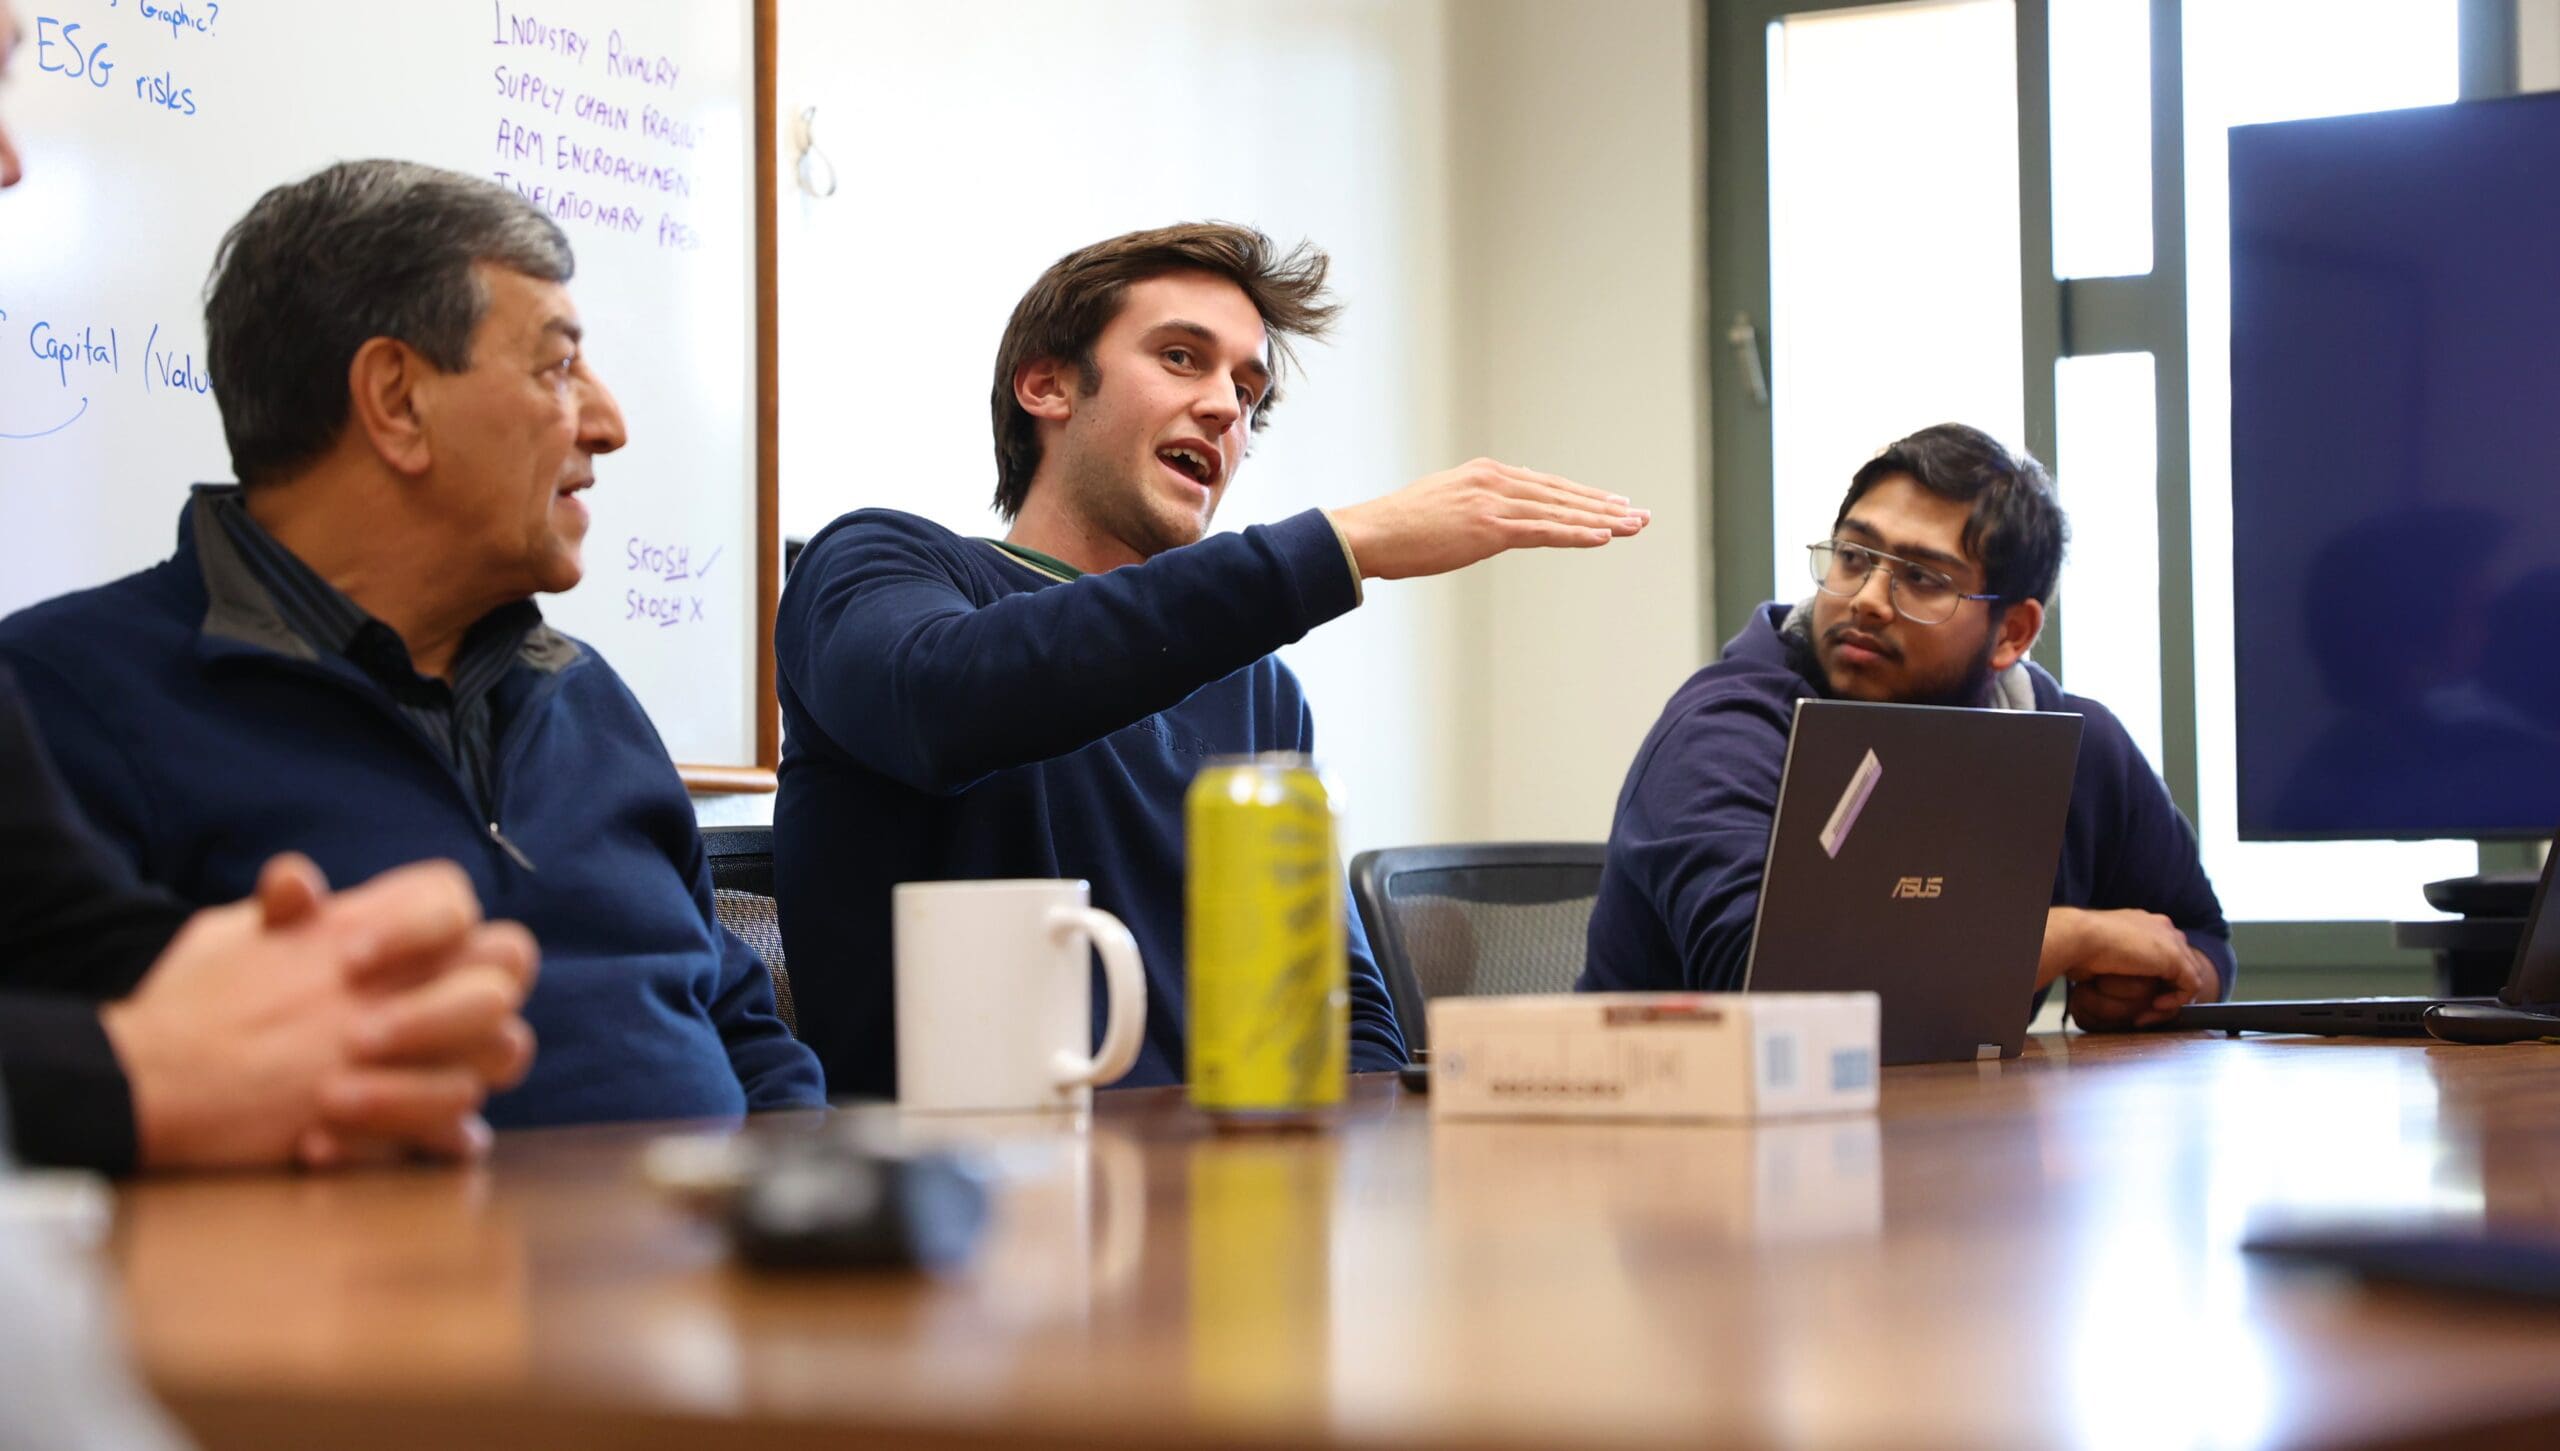 Benjamin Roe discusses his team's analysis with alumni and Finance chair Cyrus Ramezani.